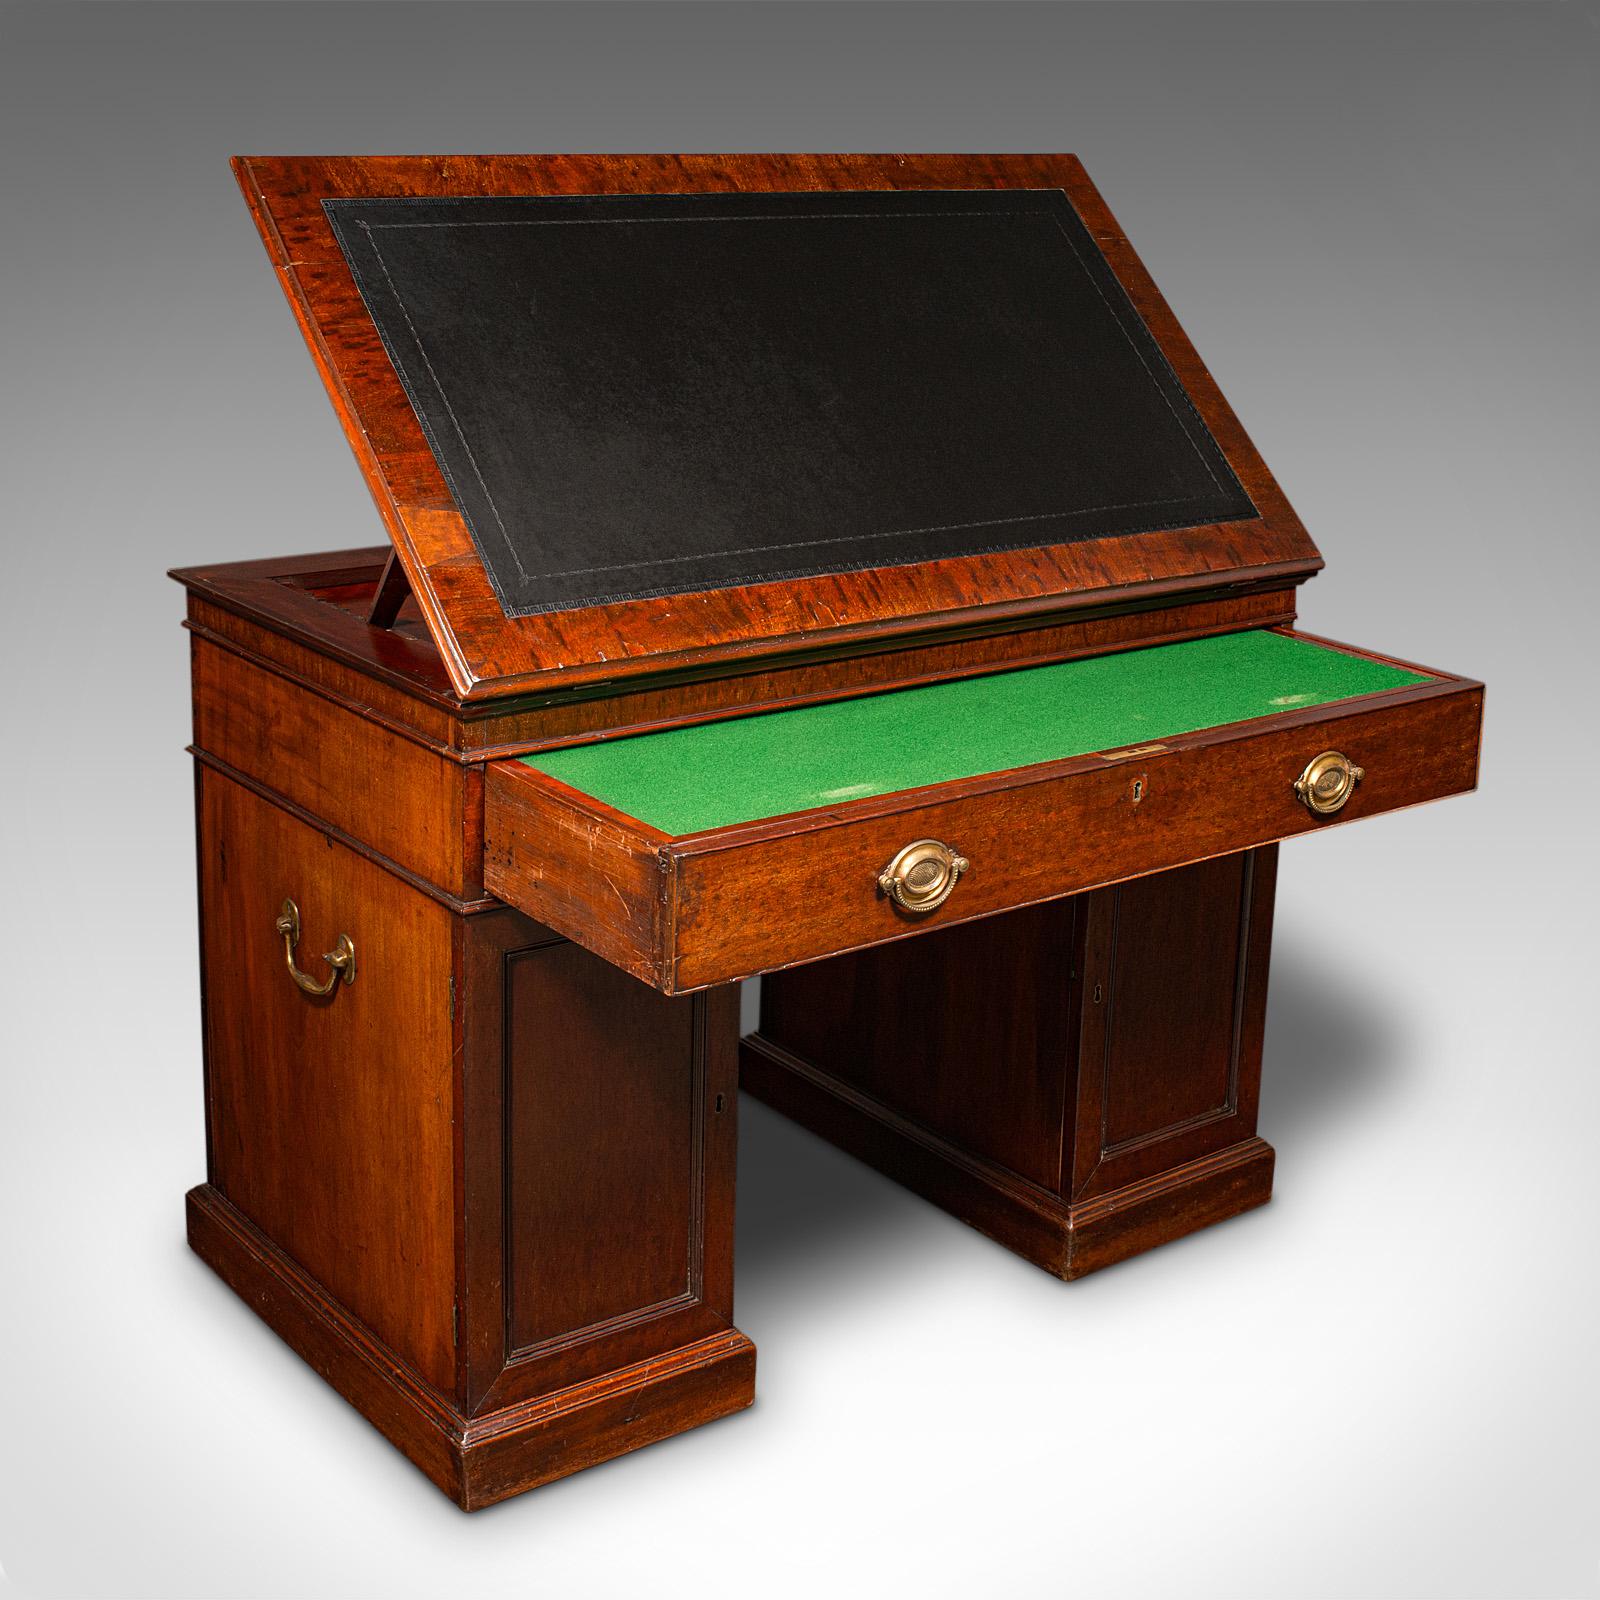 This is an antique architect's desk. An English, mahogany and leather adjustable draughtsman's pedestal desk, dating to the Georgian period, circa 1800.

Fascinating architect's desk, with campaign aesthetic and superb riser top
Displays a desirable